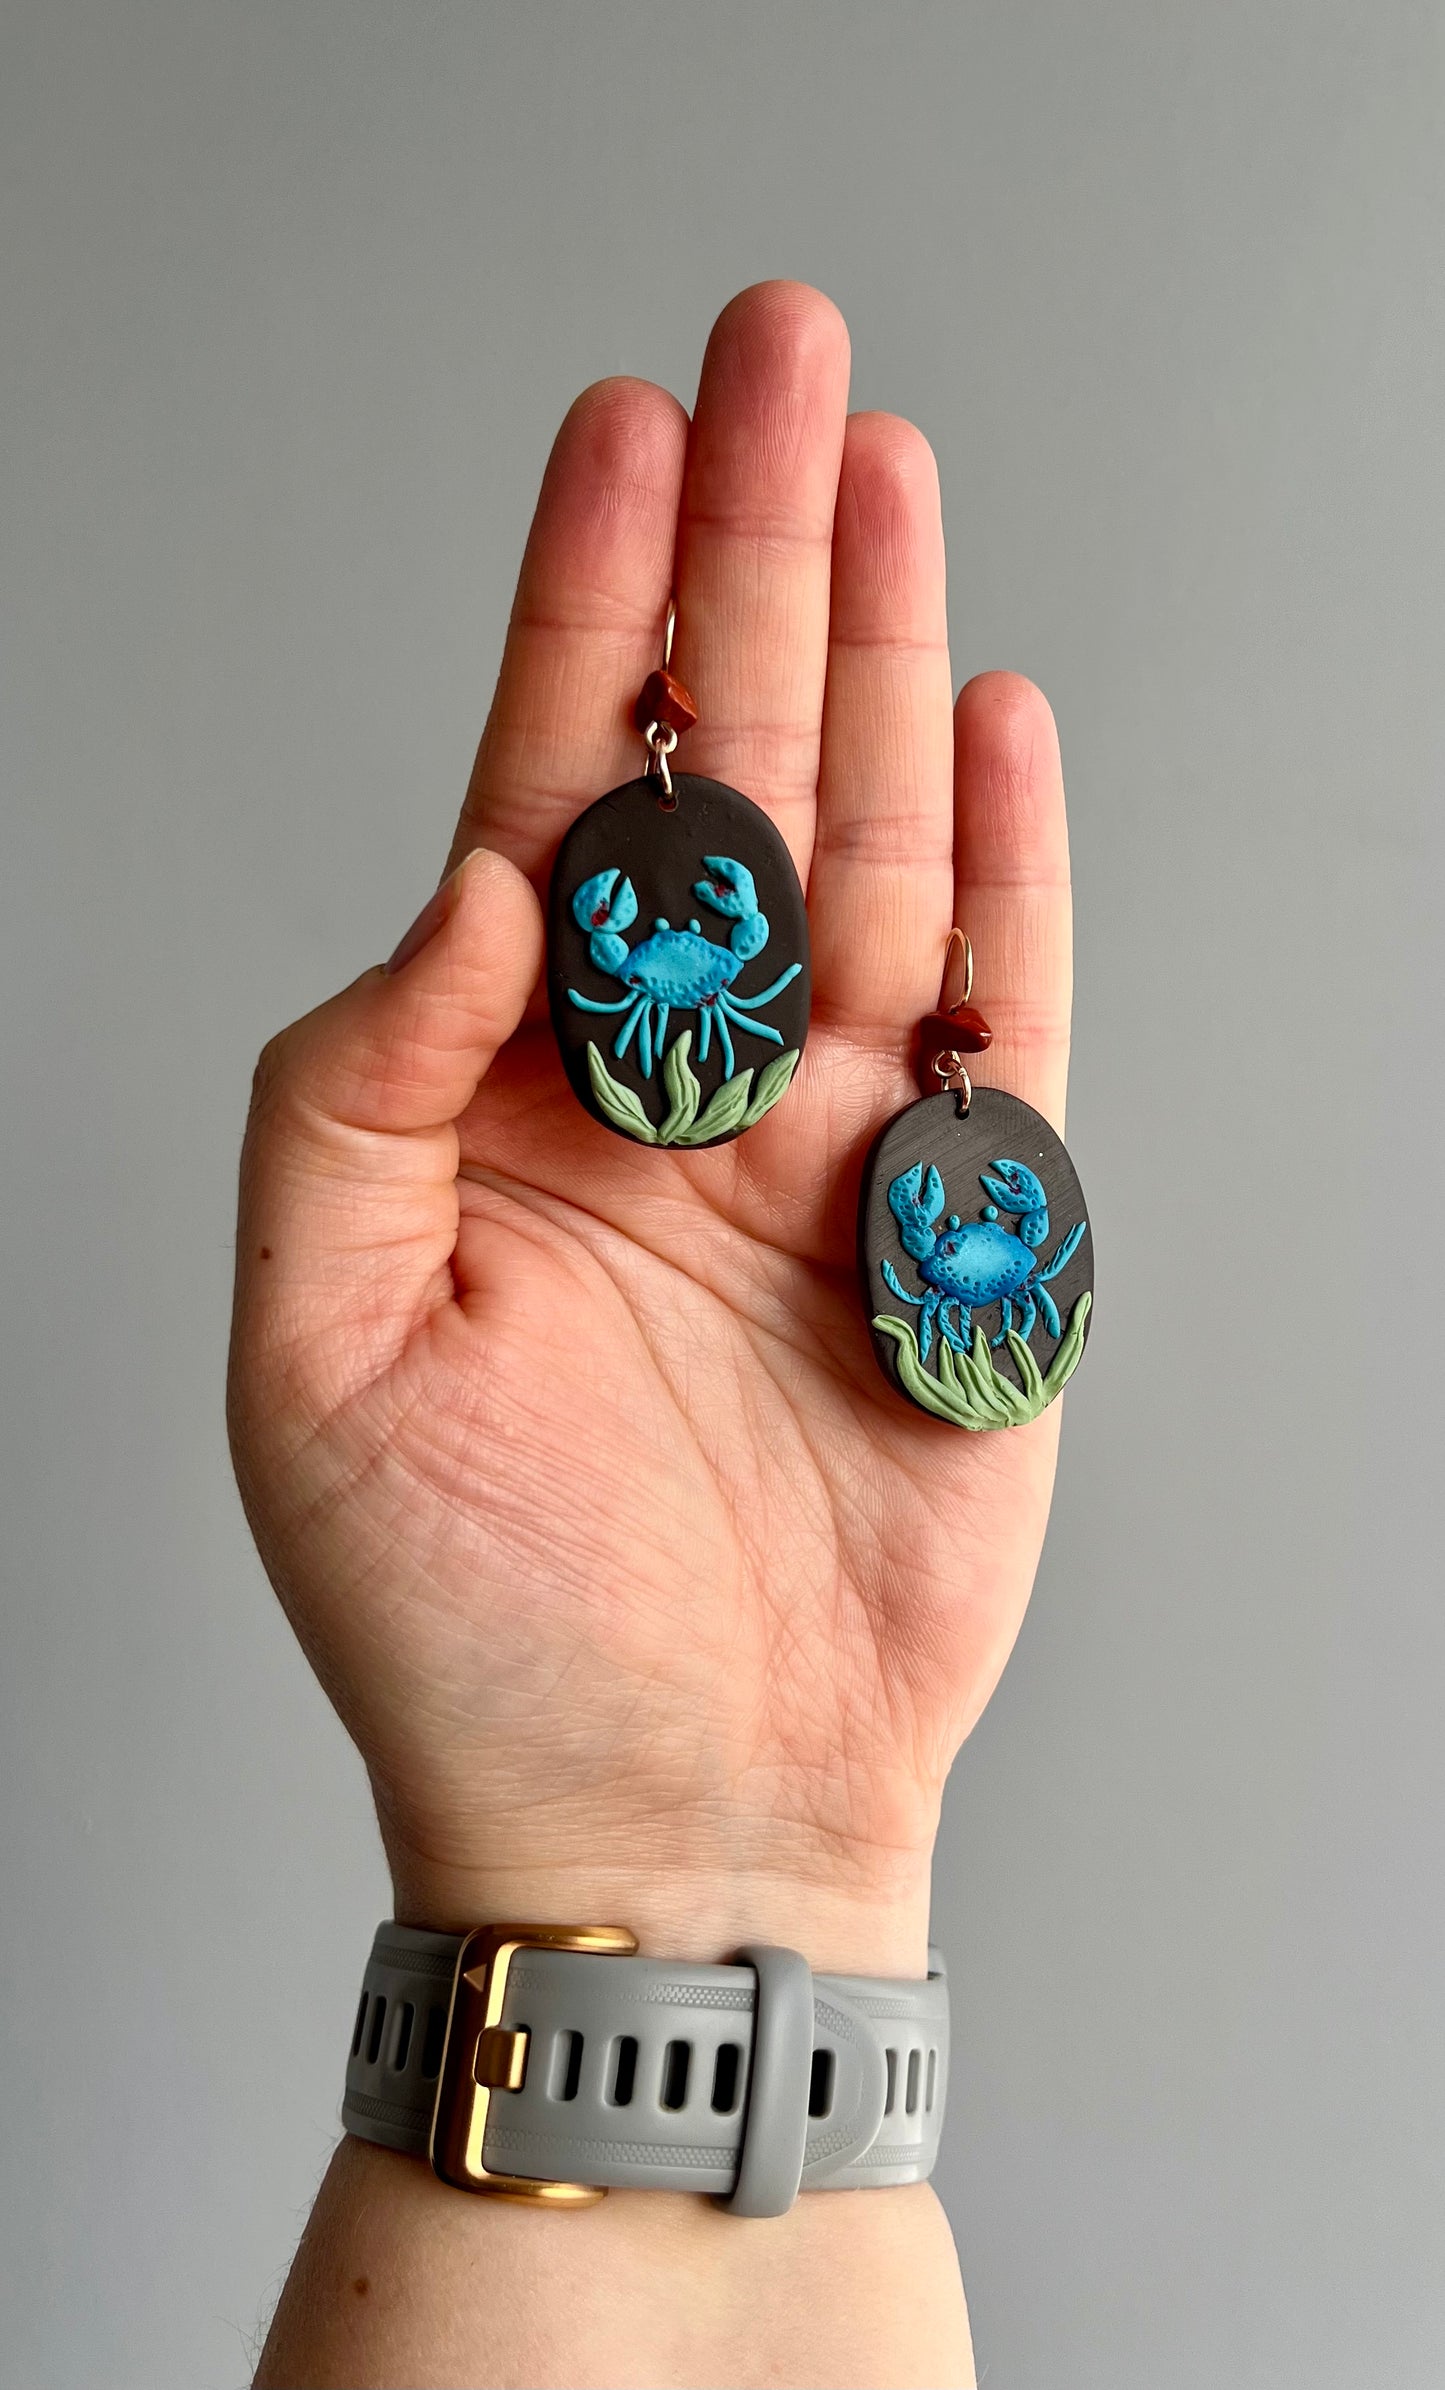 Unique polymer clay Cancer zodiac earrings adorned with red jasper, portraying a blue crab in its oceanic habitat. Handcrafted with care, these earrings capture the intuitive and nurturing essence of Cancer, while the red jasper accent enhances emotional balance. Embrace your sensitivity with this symbolic accessory. Shop now!